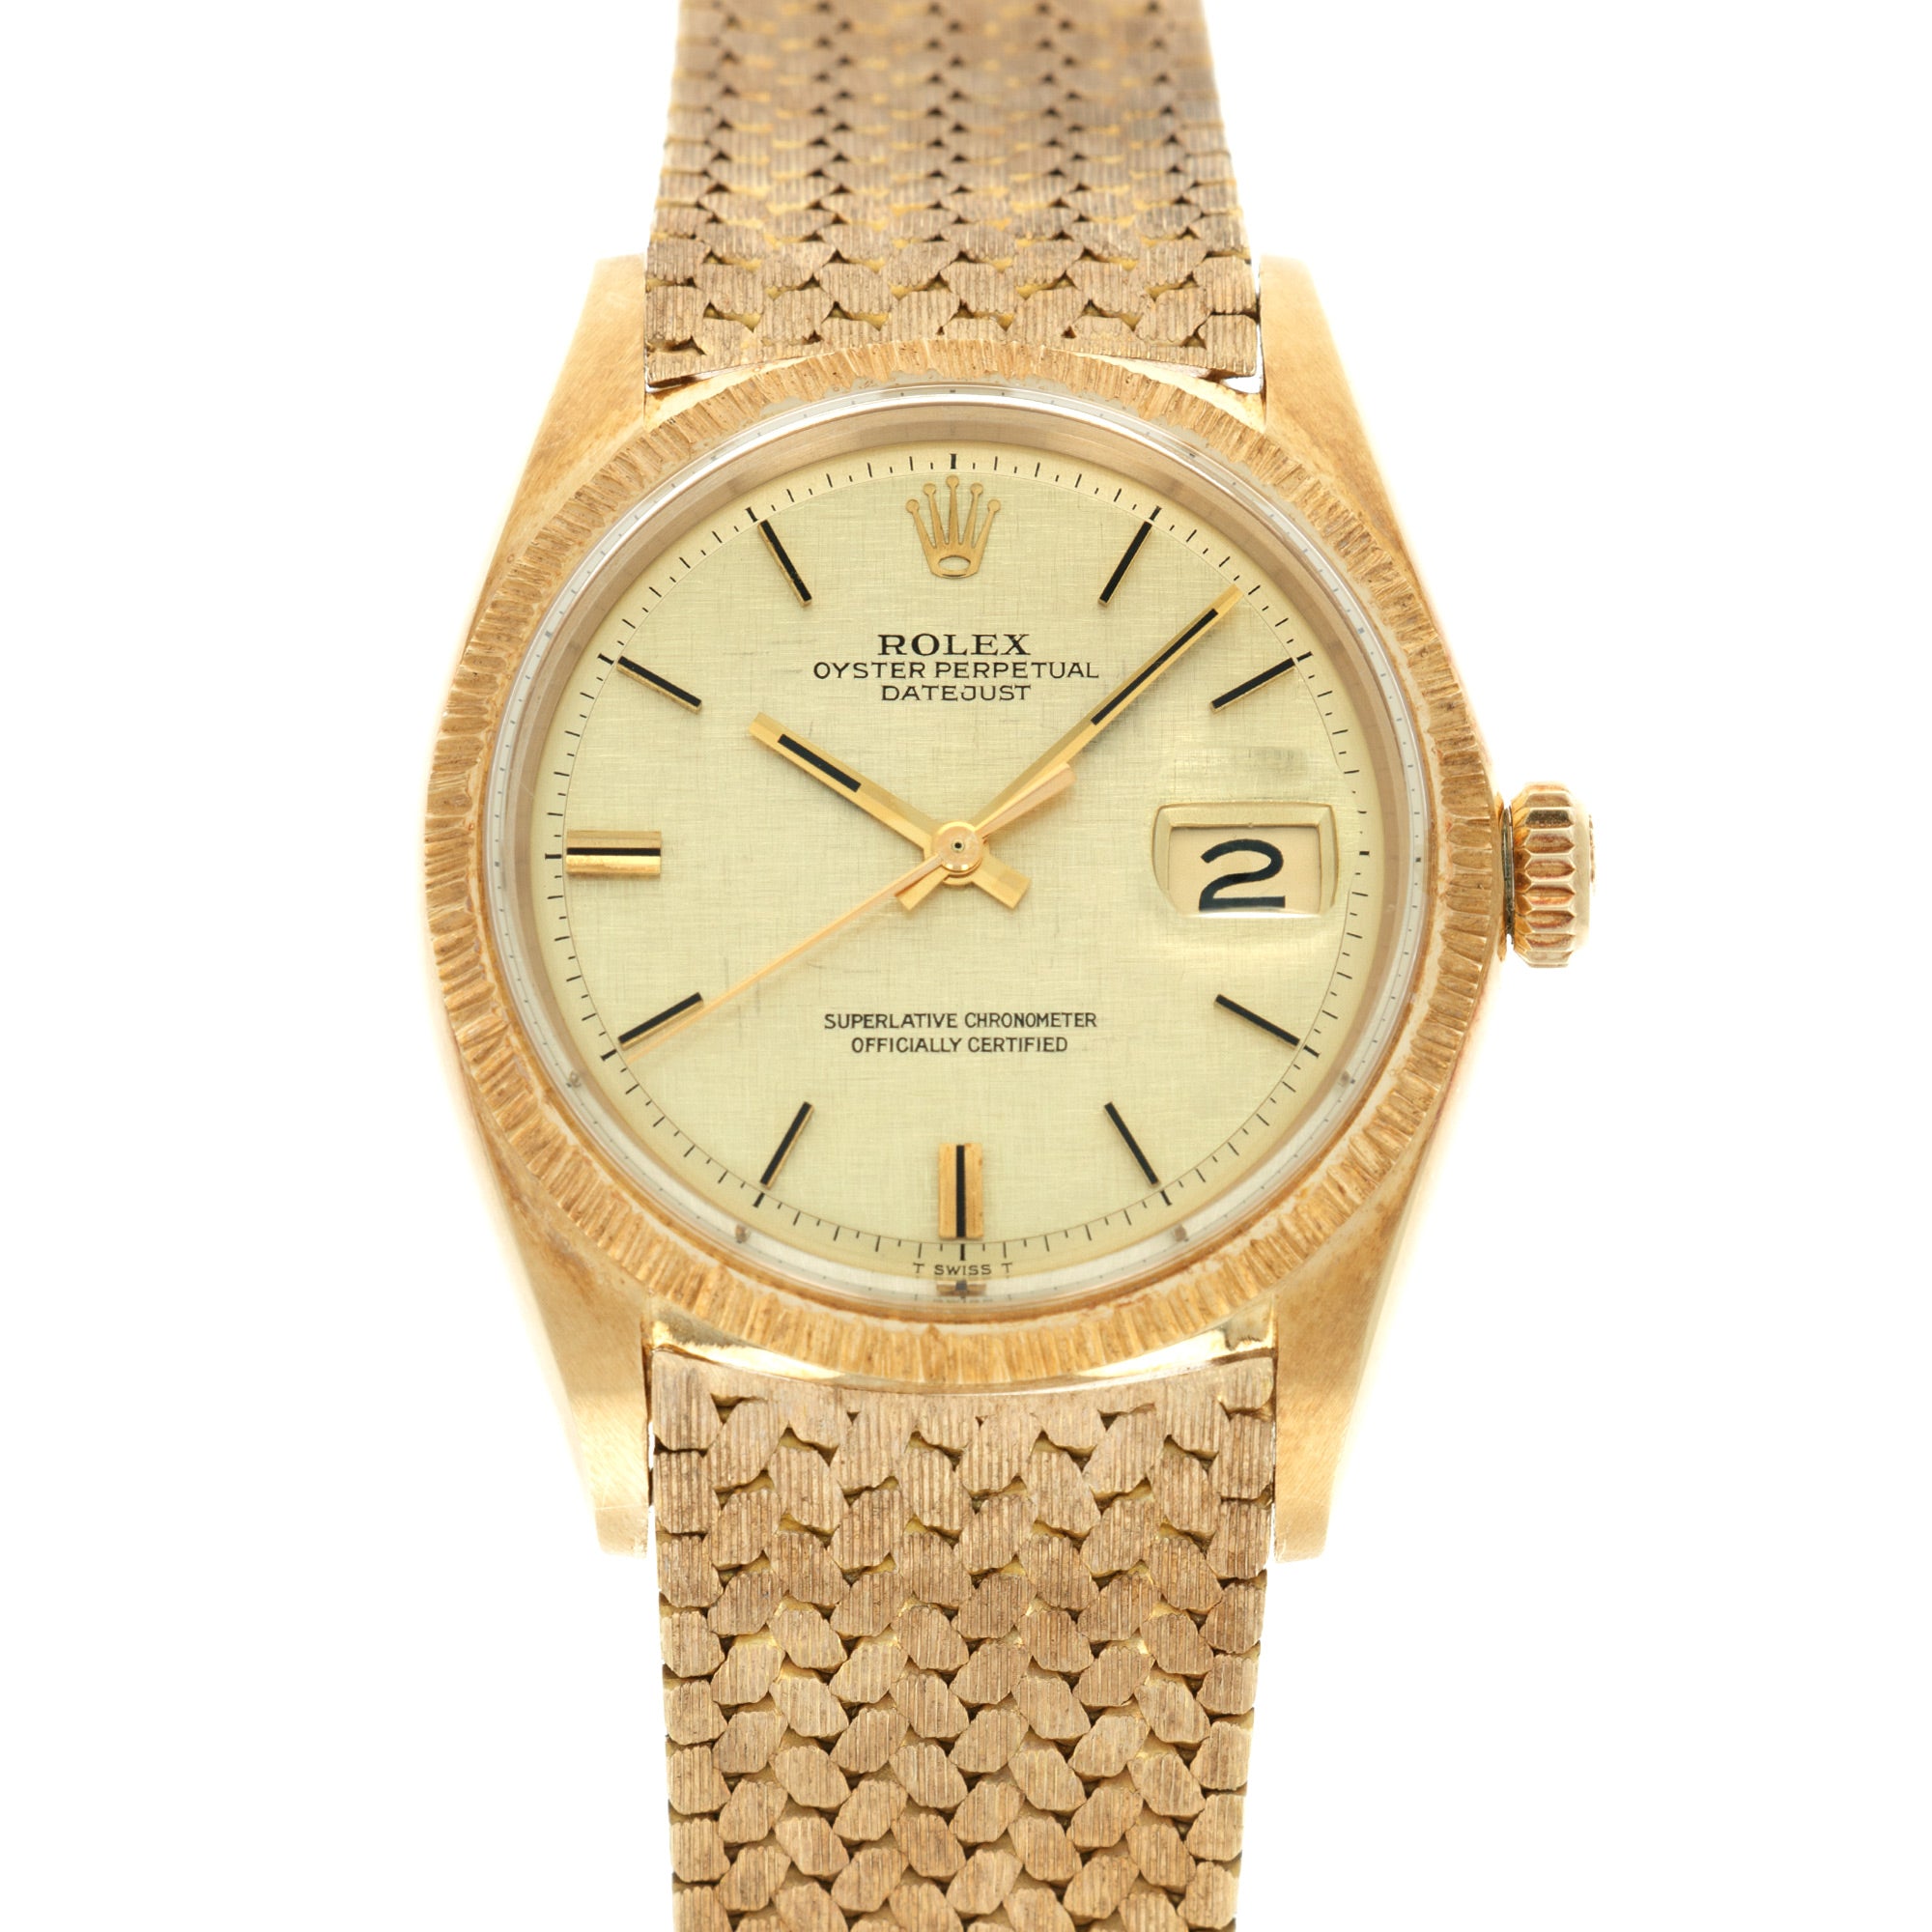 Rolex - Rolex Yellow Gold Datejust Ref. 1607 with Unusual Bracelet - The Keystone Watches